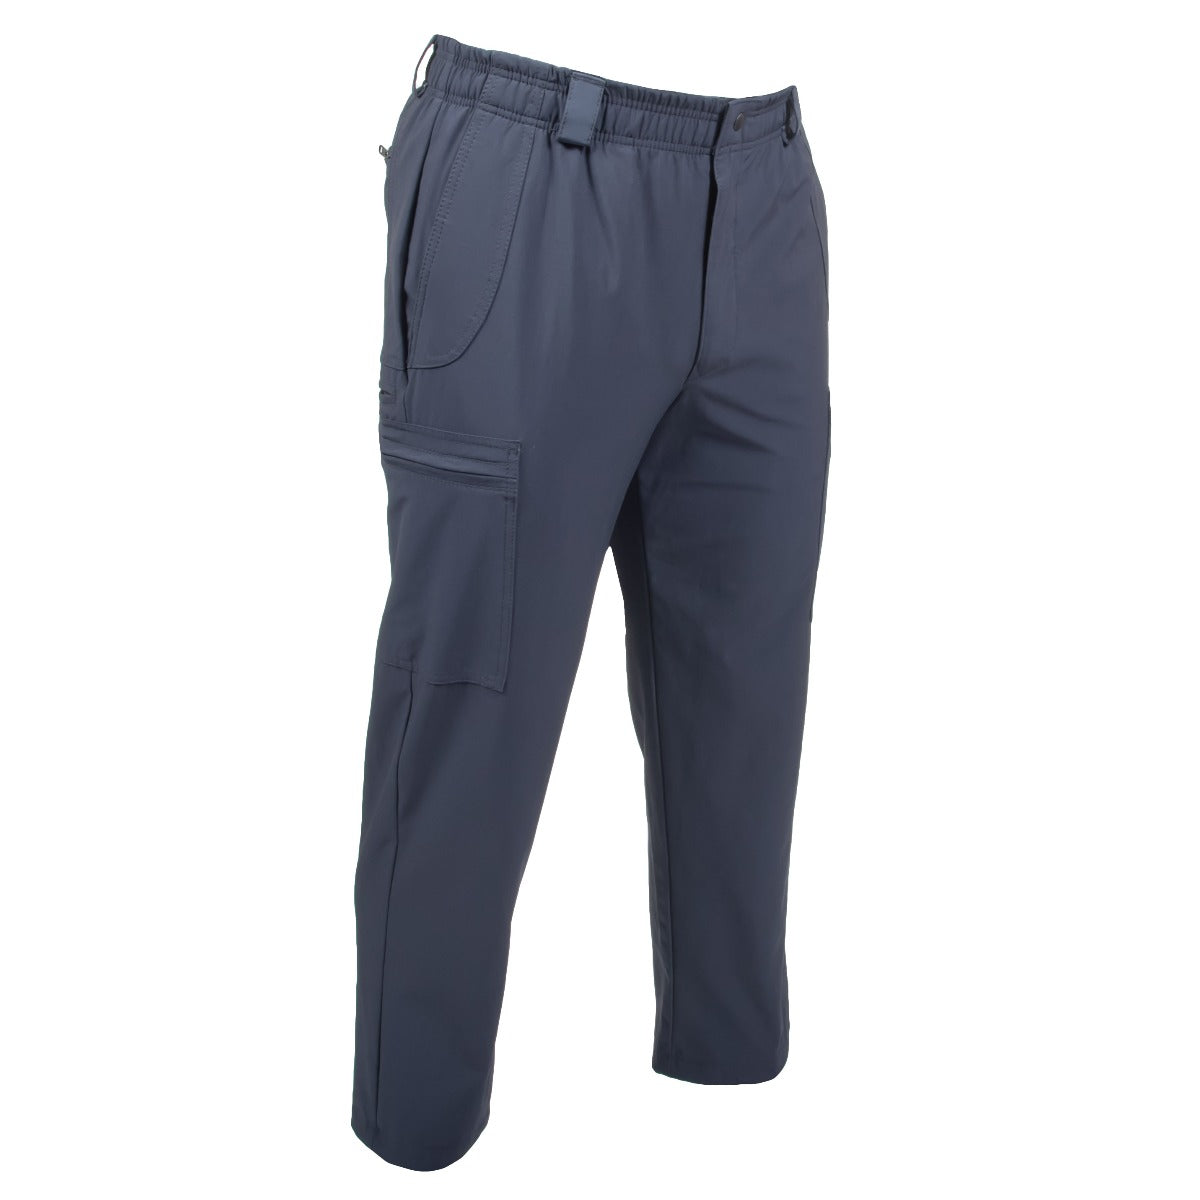 Winter work trousers, high visibility OIVA from eShop